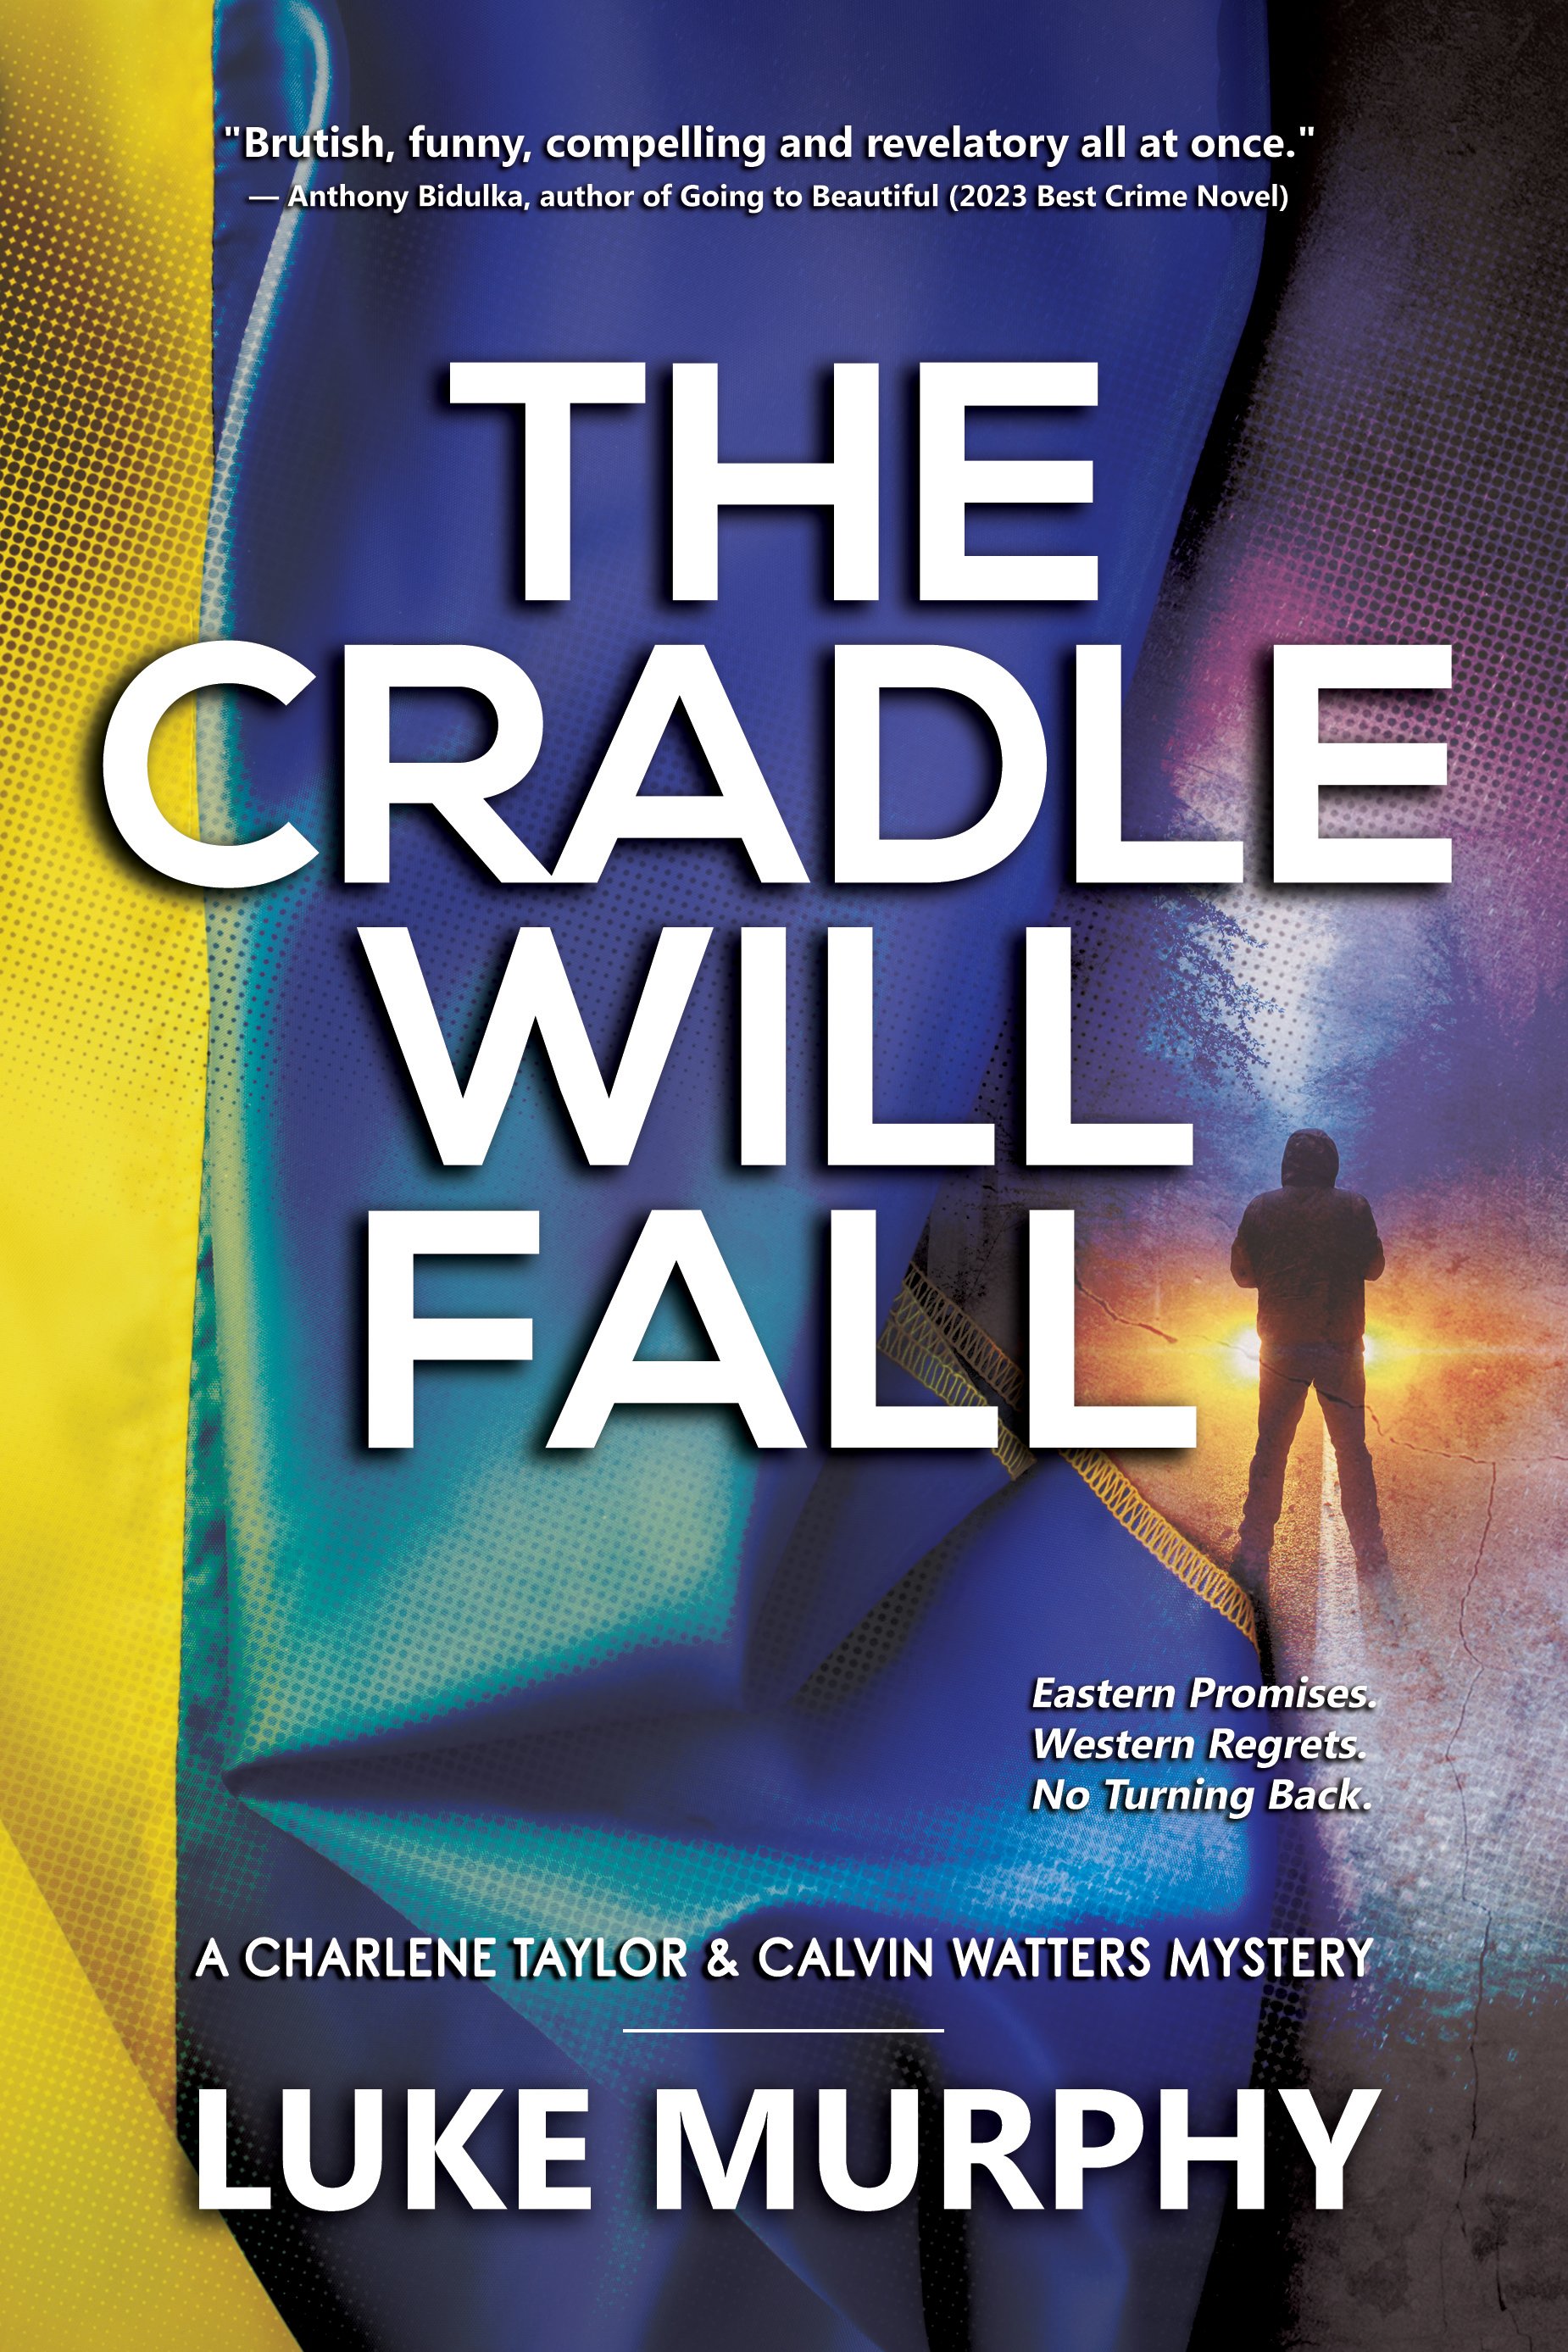 101ca Lukes Book Amazon Layout - The Cradle Will Fall - Final Front Cover (2).jpg (Copy) (Copy) (Copy) (Copy) (Copy)